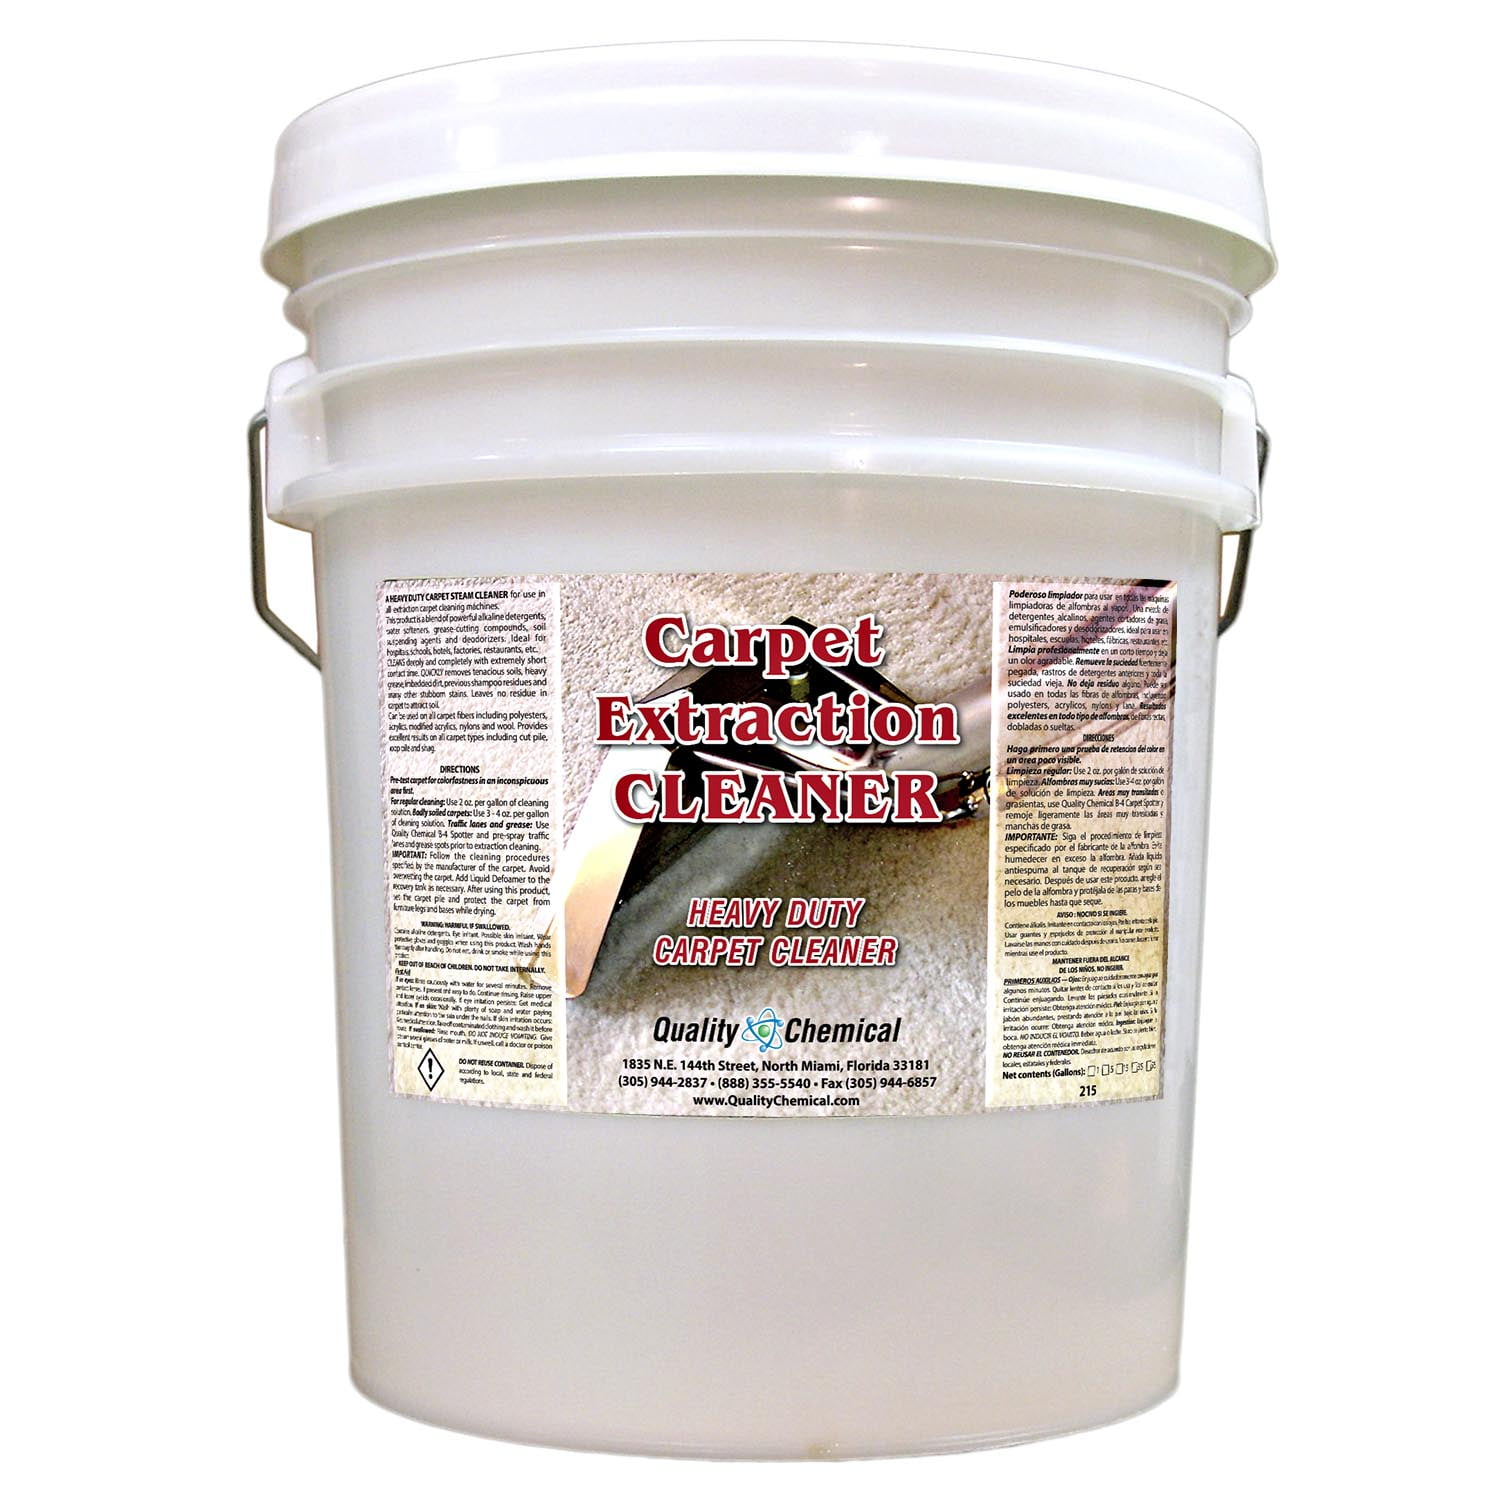 Procyon Carpet & Upholstery Cleaner Concentrate - 5 Gallon Pail